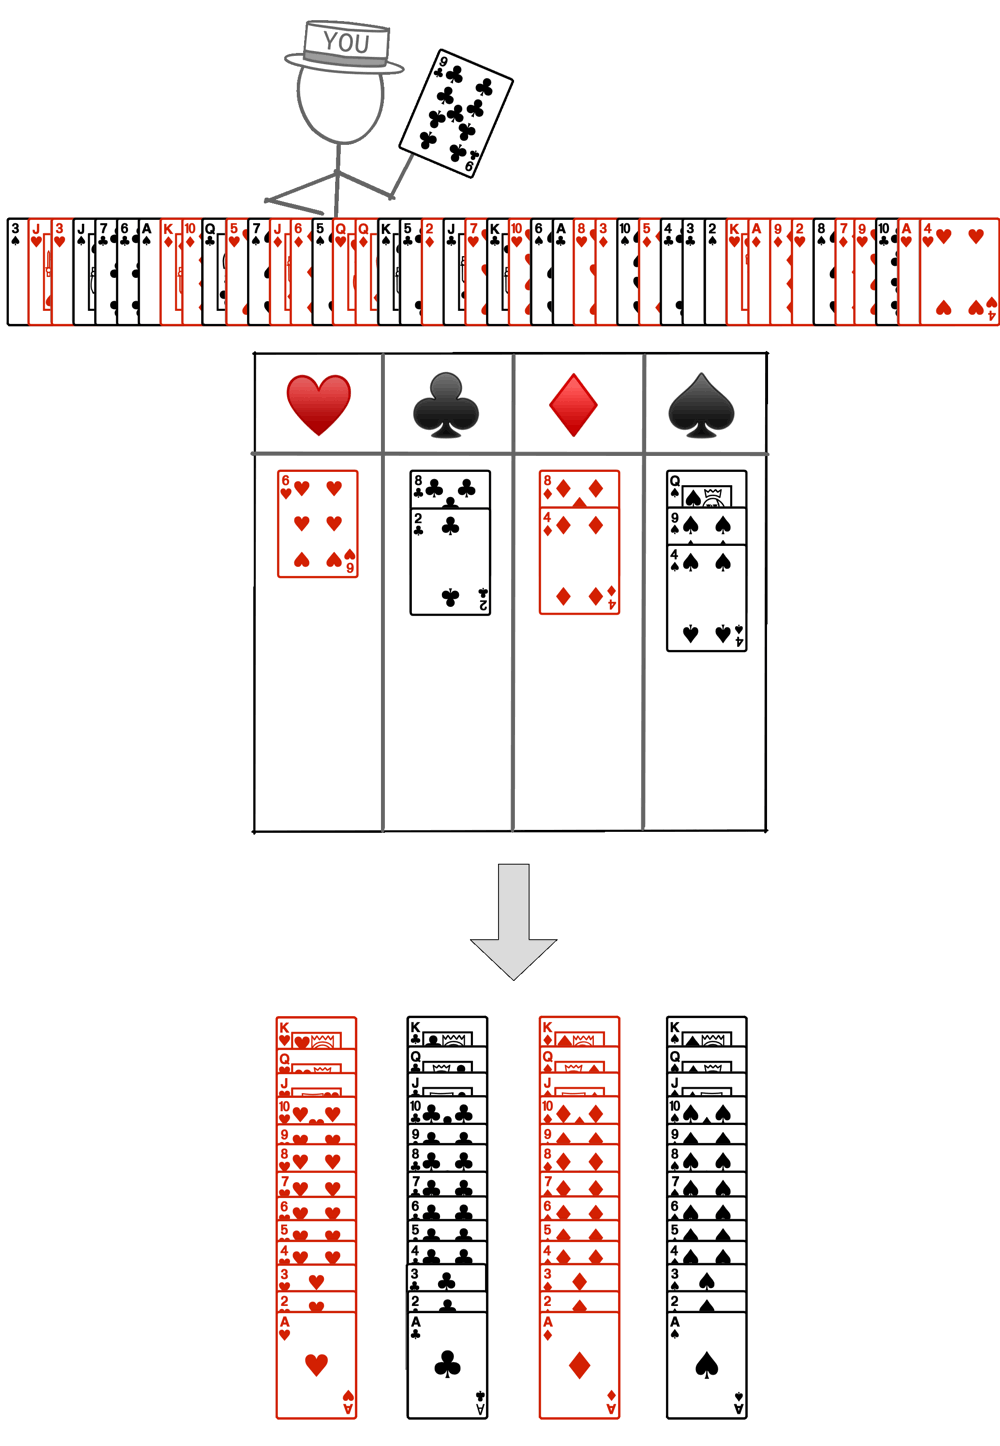 A single person sorts a shuffled deck of cards by color, suit and face value. The output is four, sorted, same-suit piles.